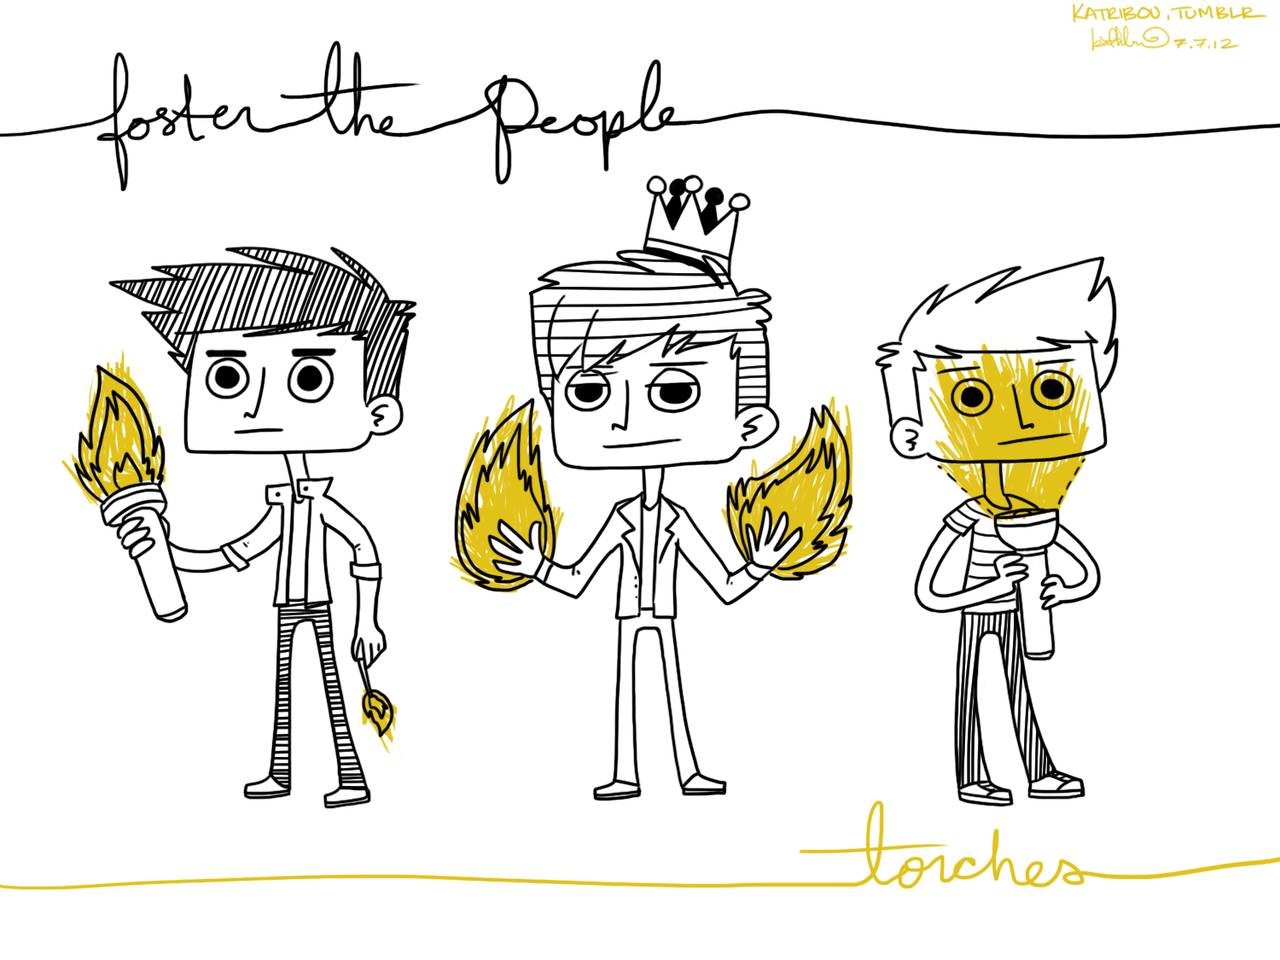 foster the people logo tumblr